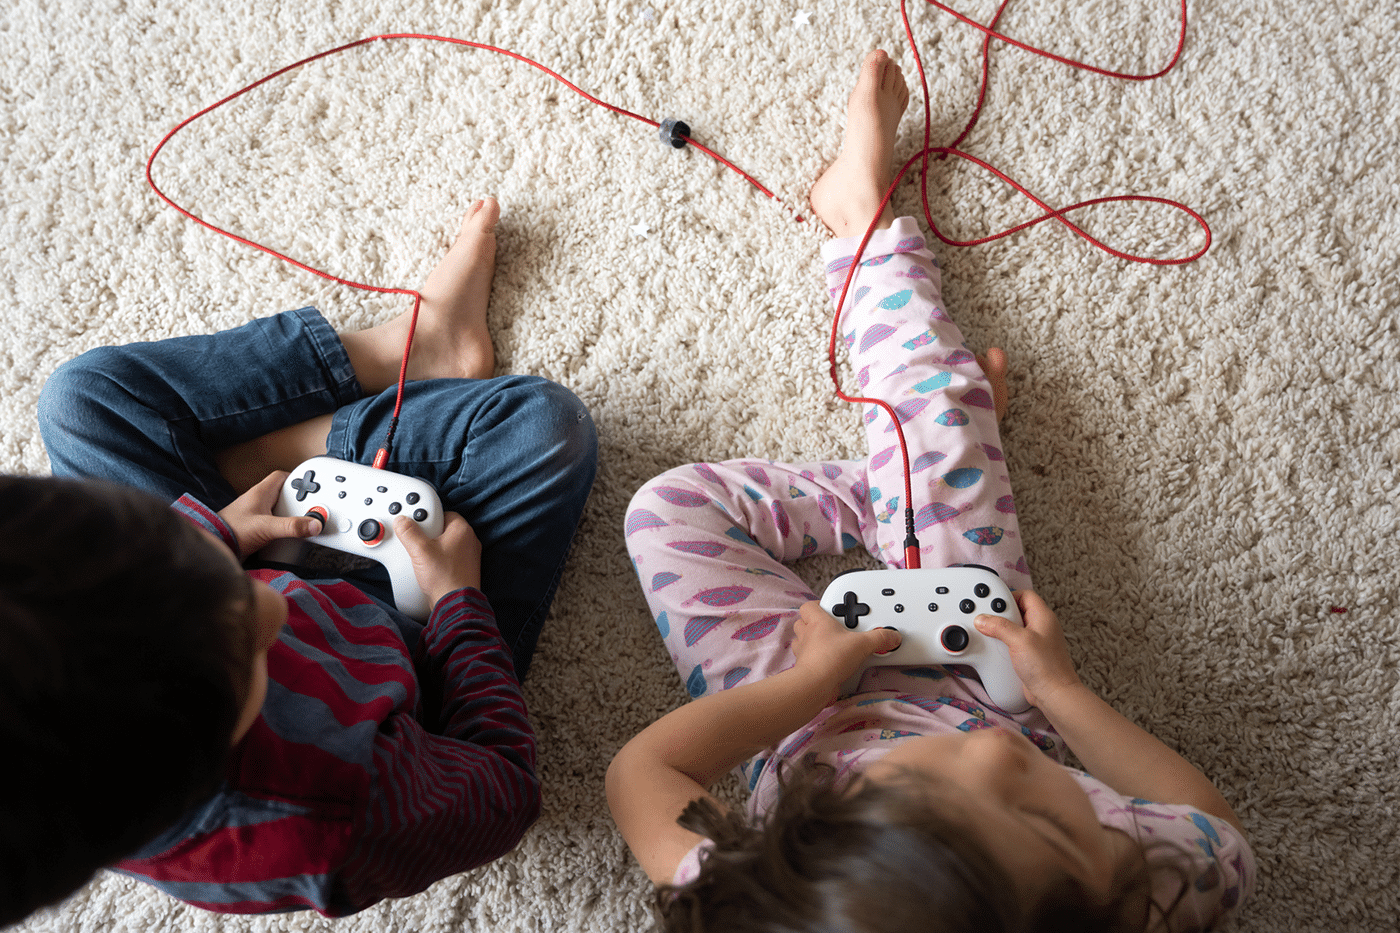 Overhead shot of kids playing video games, holding controller